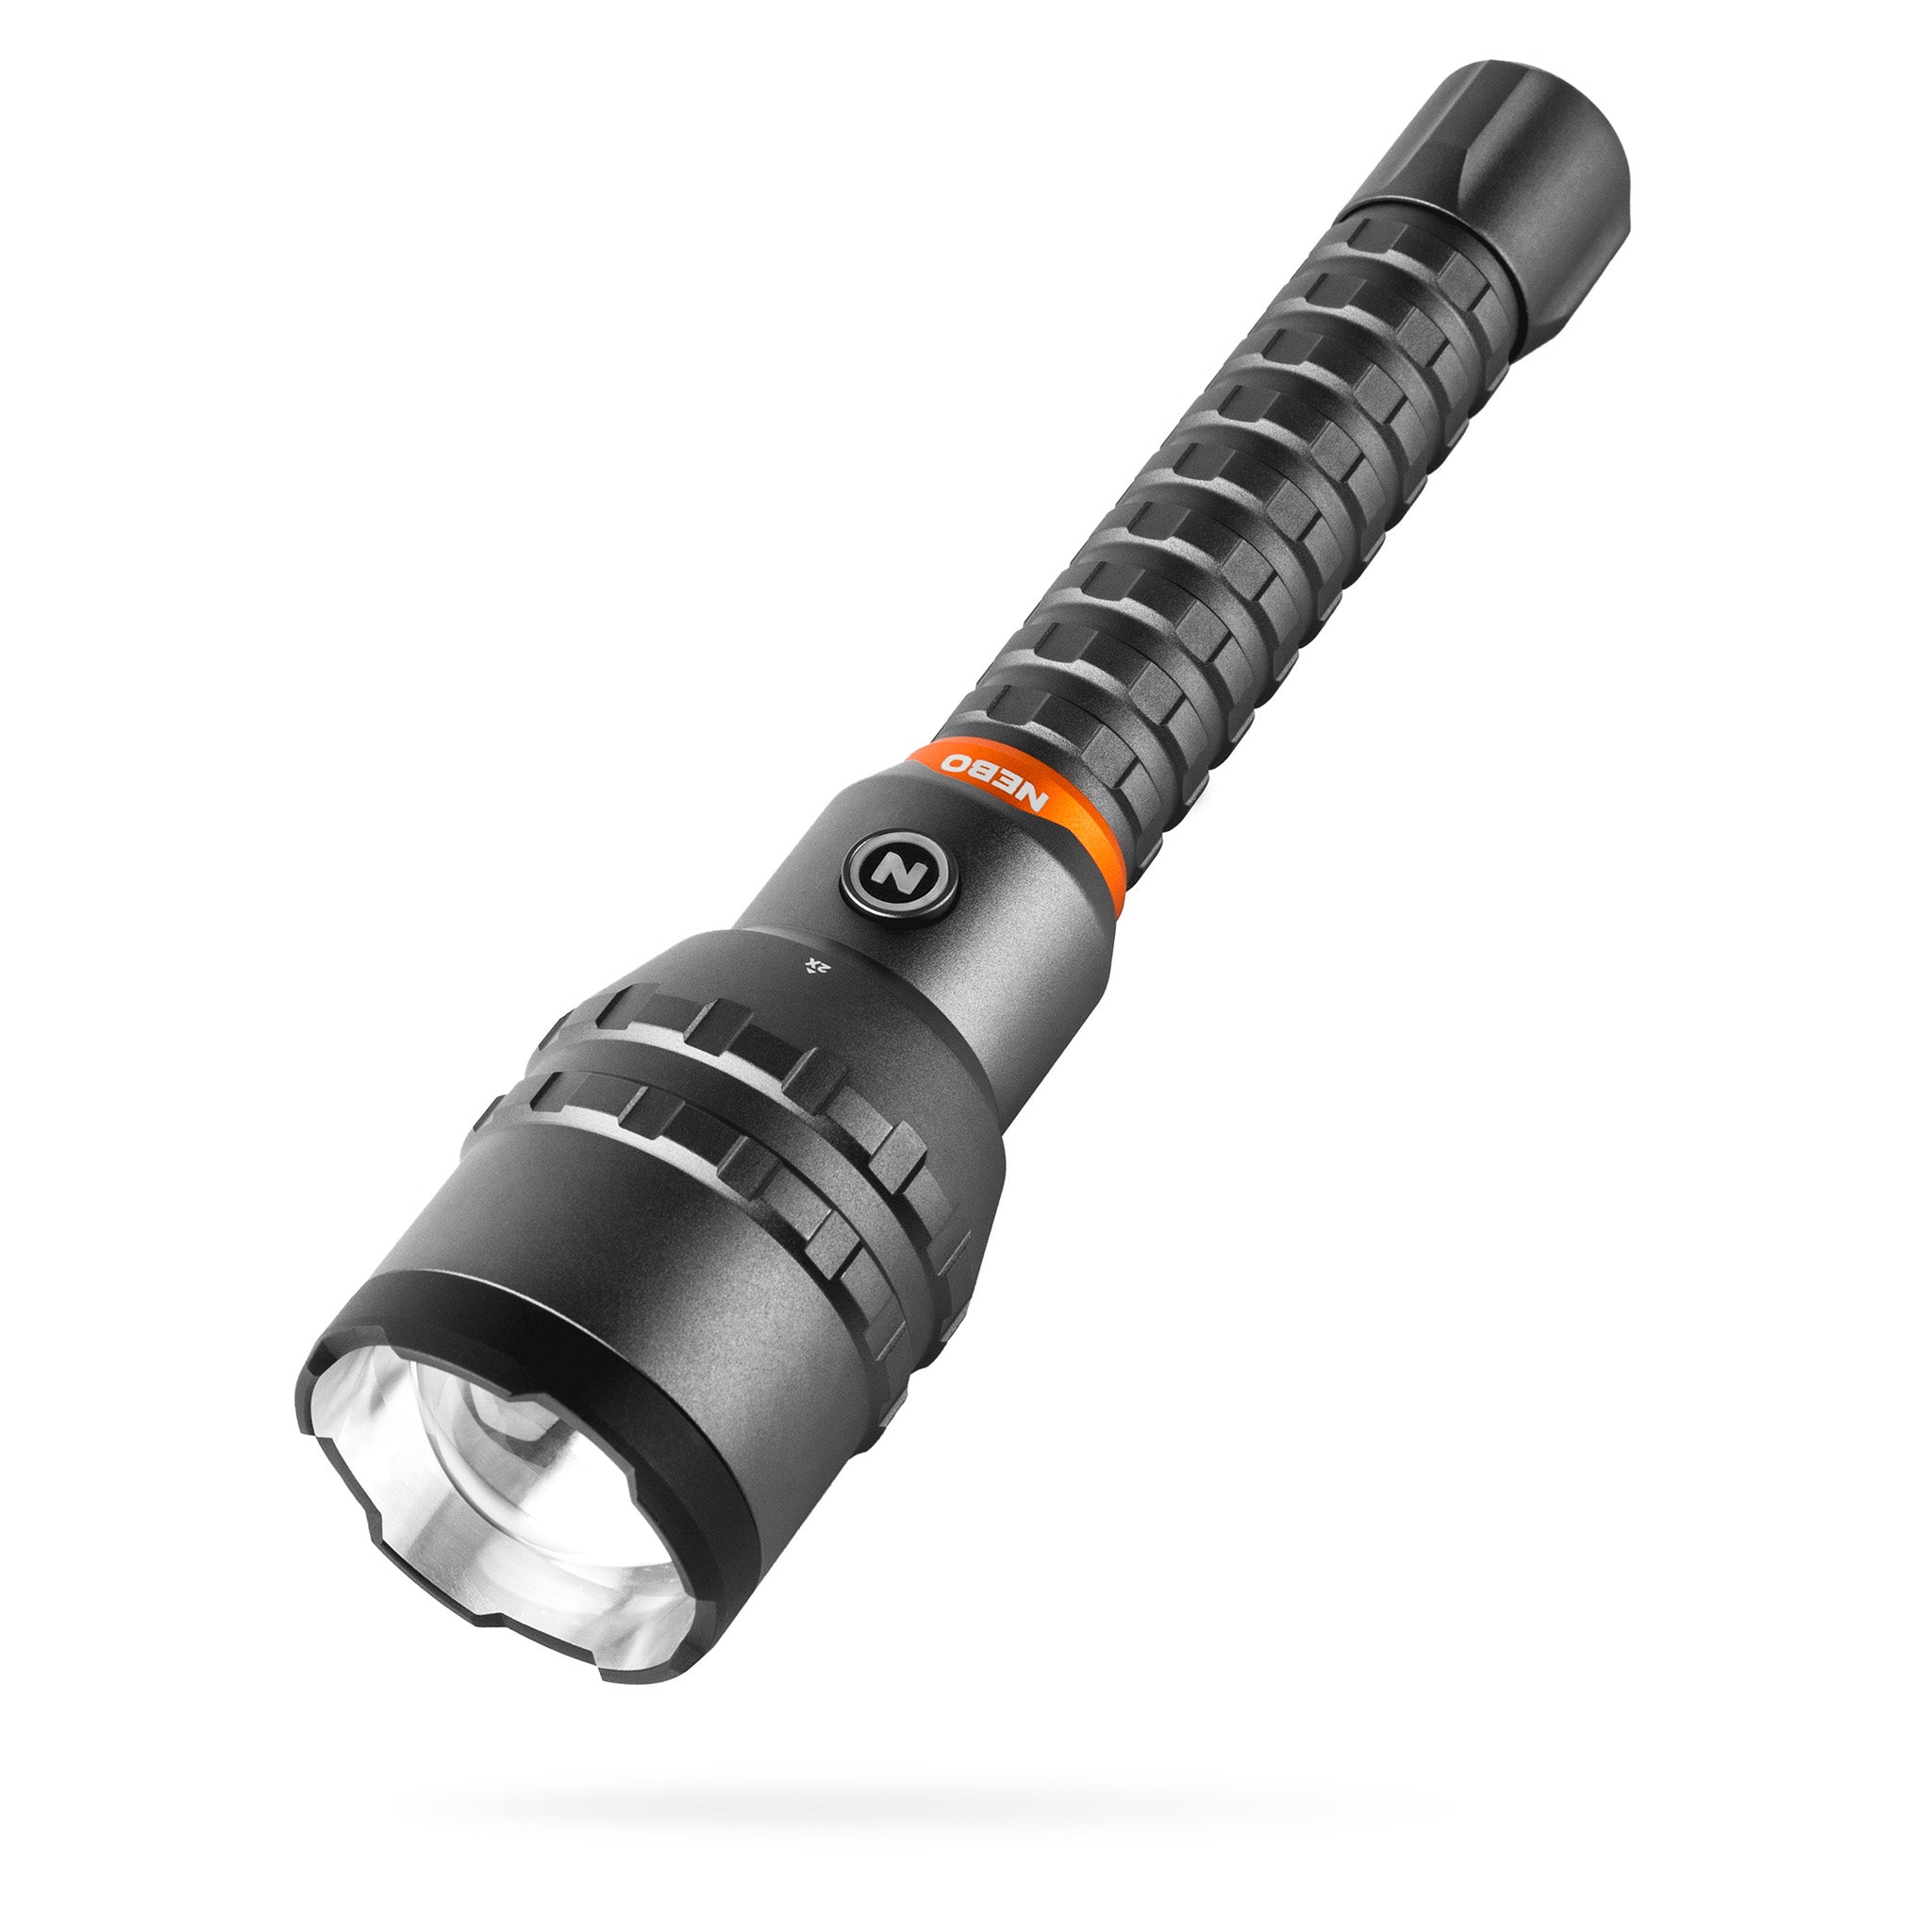 Rechargeable Flashlight | Best flashlight with Power Bank | Companion